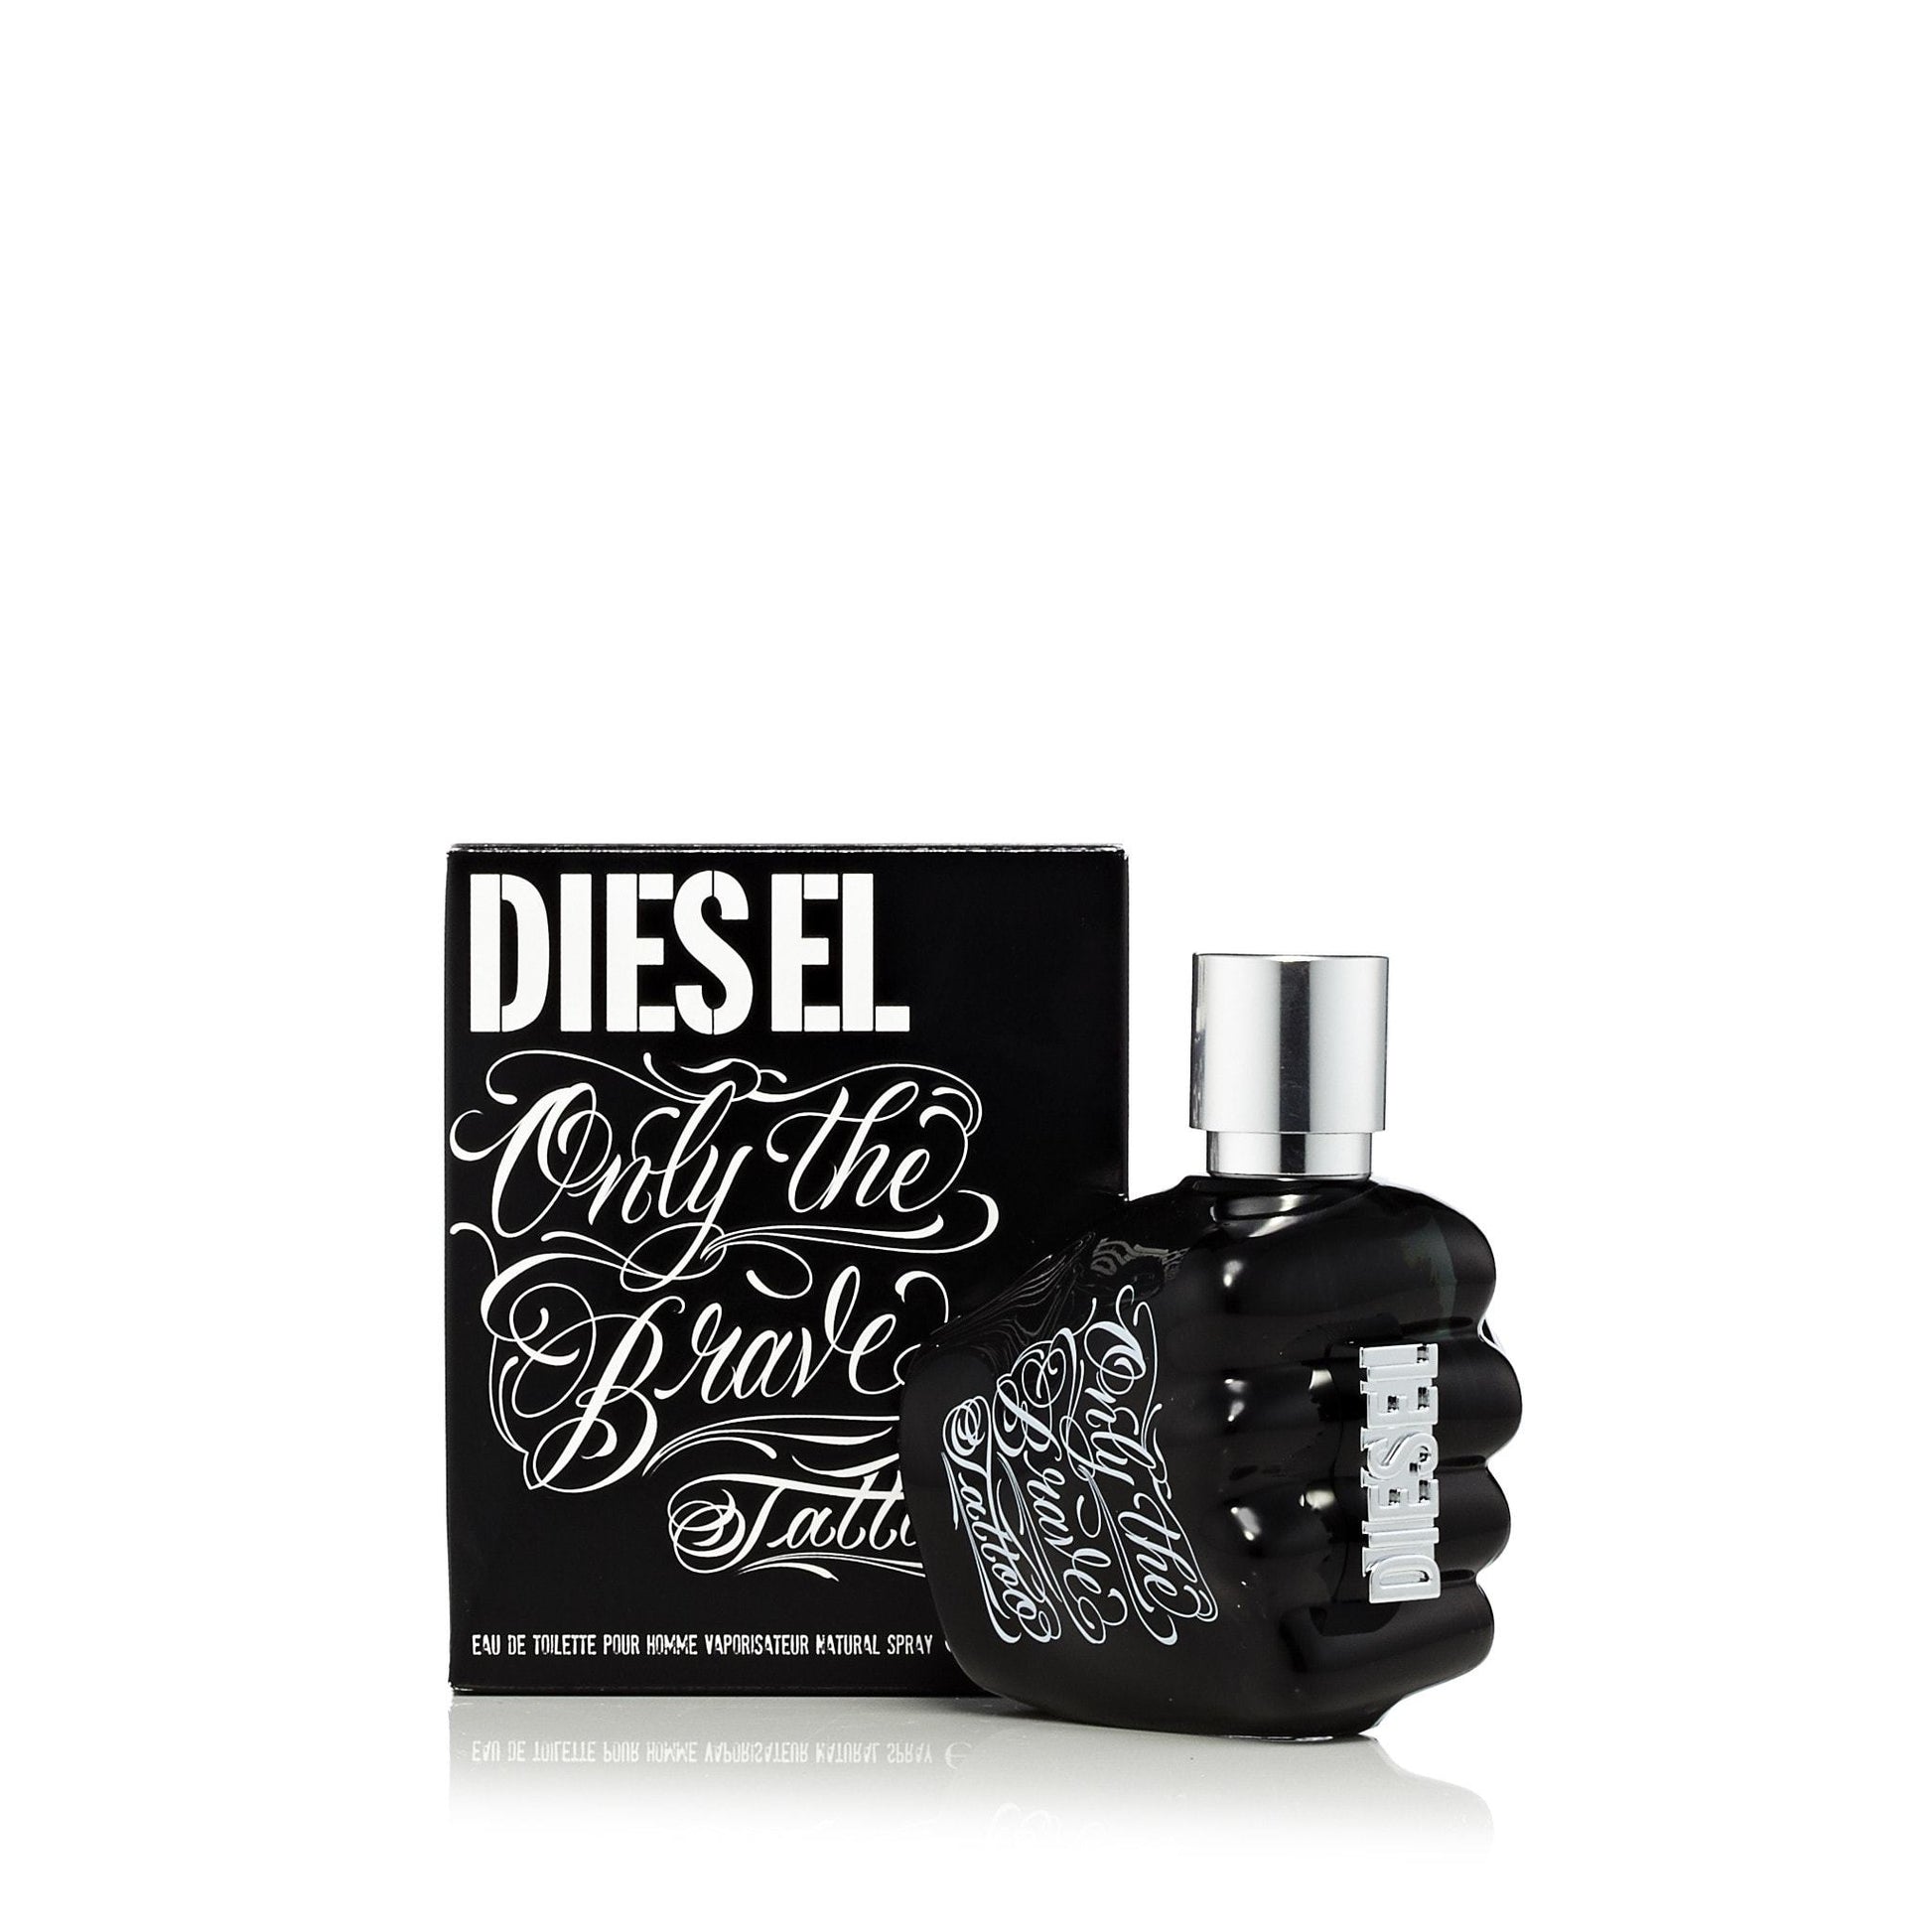 Only The Brave Tattoo Eau de Toilette Spray for Men by Diesel, Product image 3